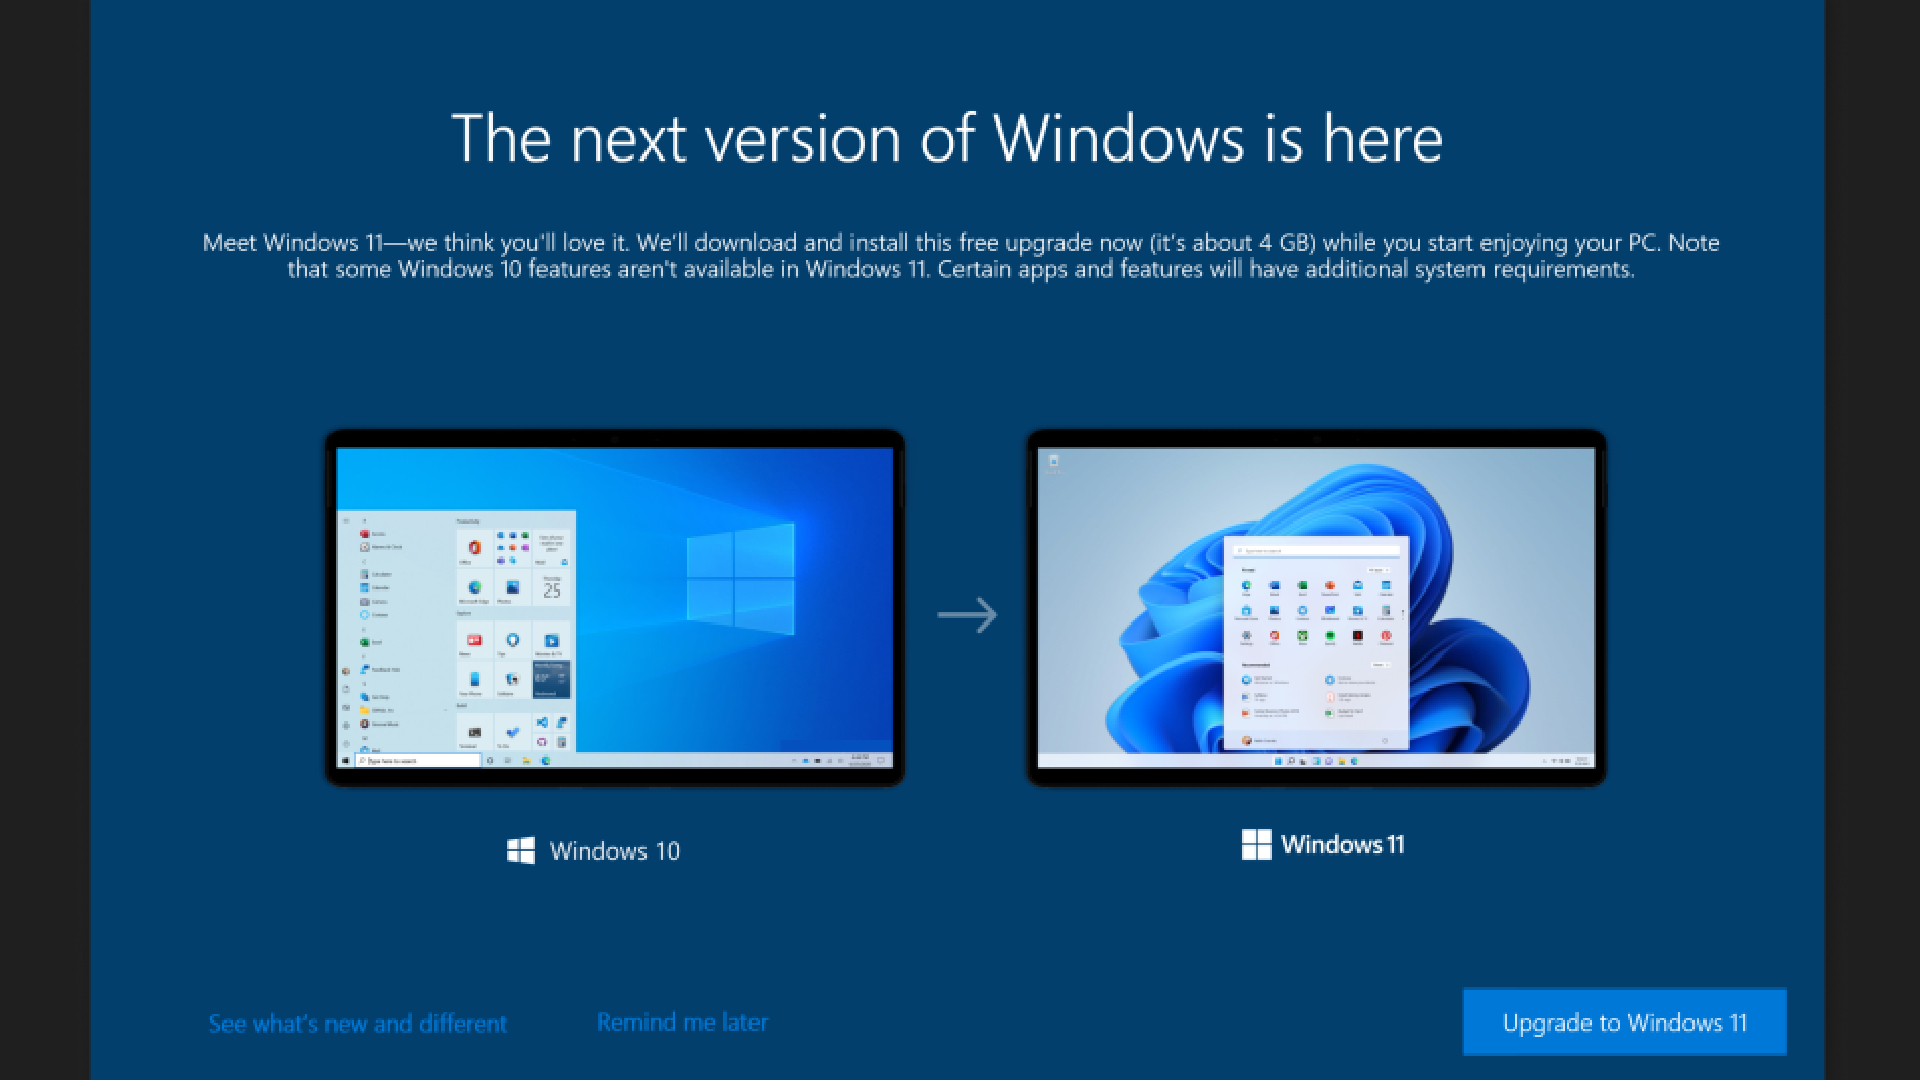 How to download Windows 11 for free